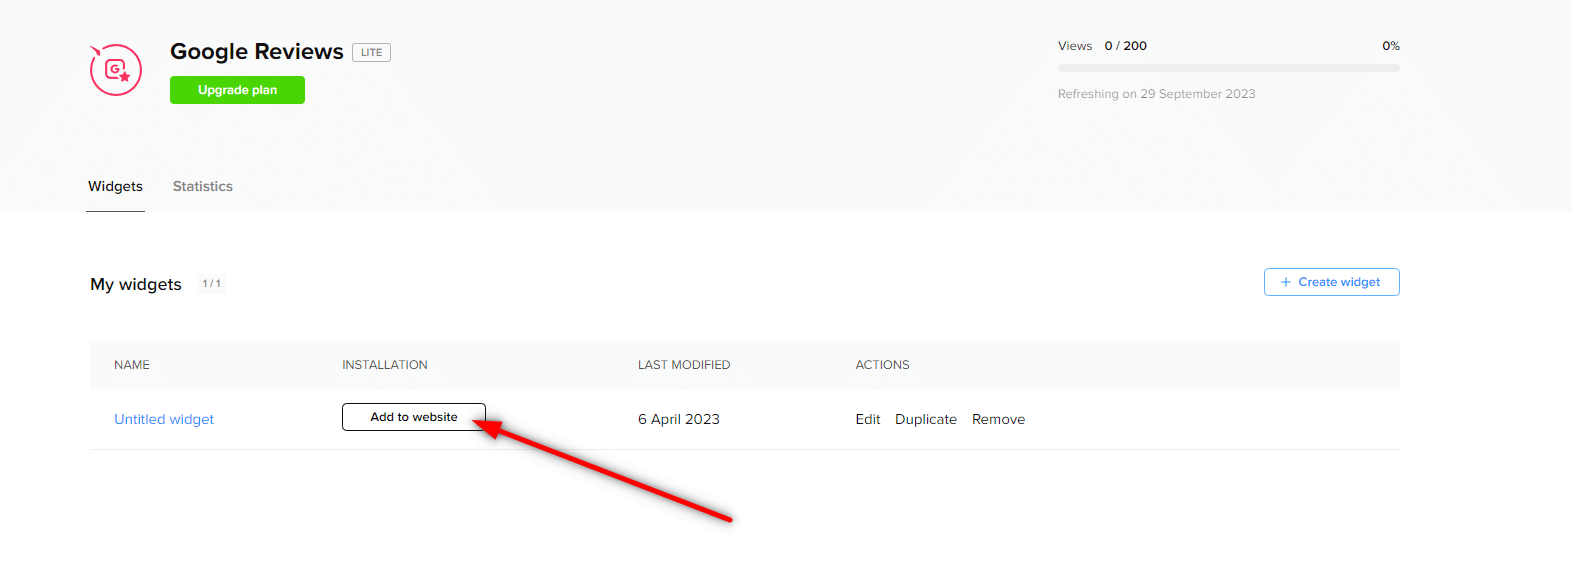 After registering with Elfsight, click on the "Add to website" button.